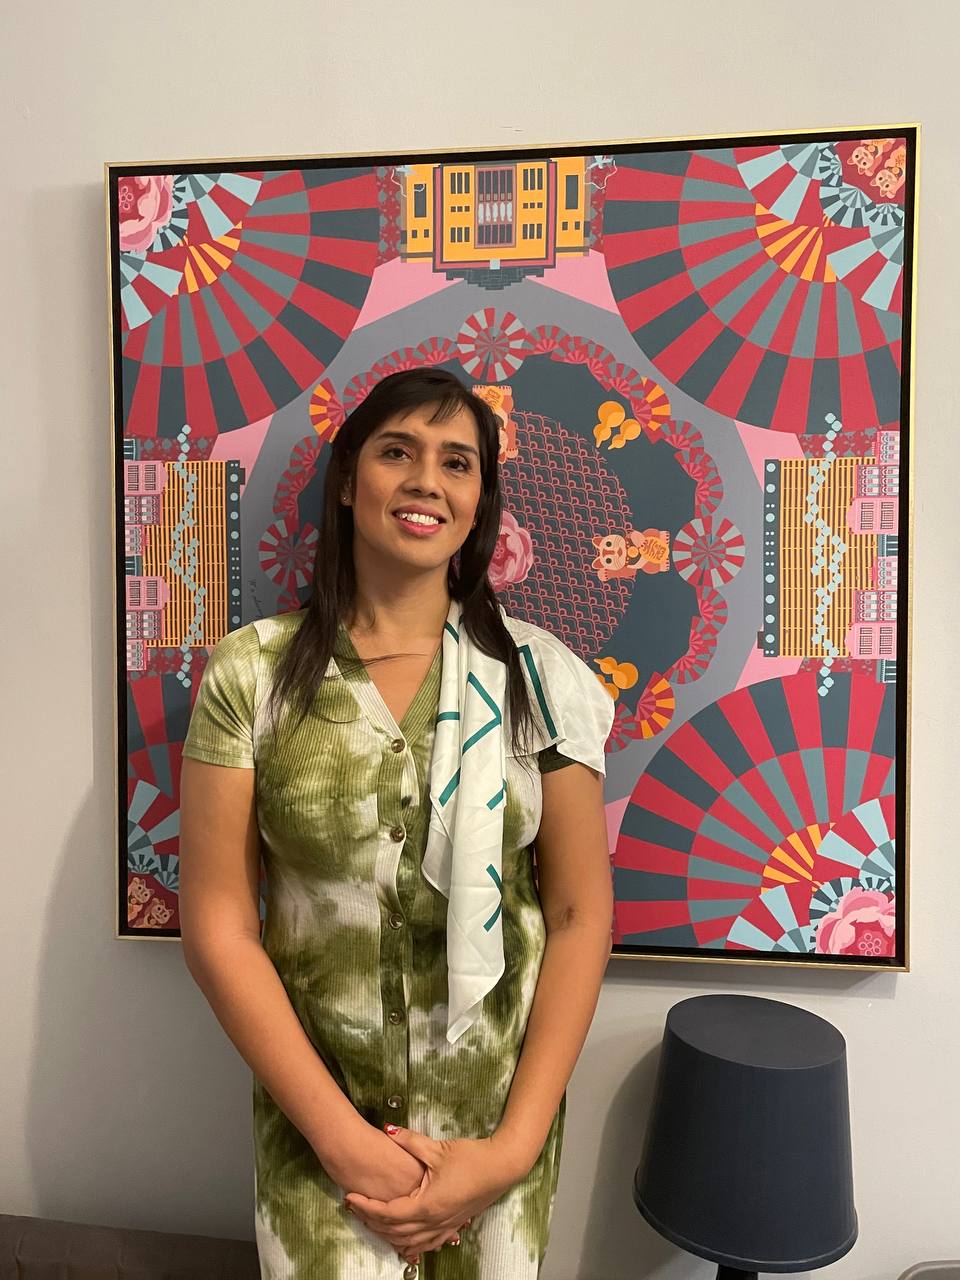 Shania dons a white scarf and a green dress. She stands in front of an art piece with pink, blue, and yellow designs on it, and smiles for the camera.